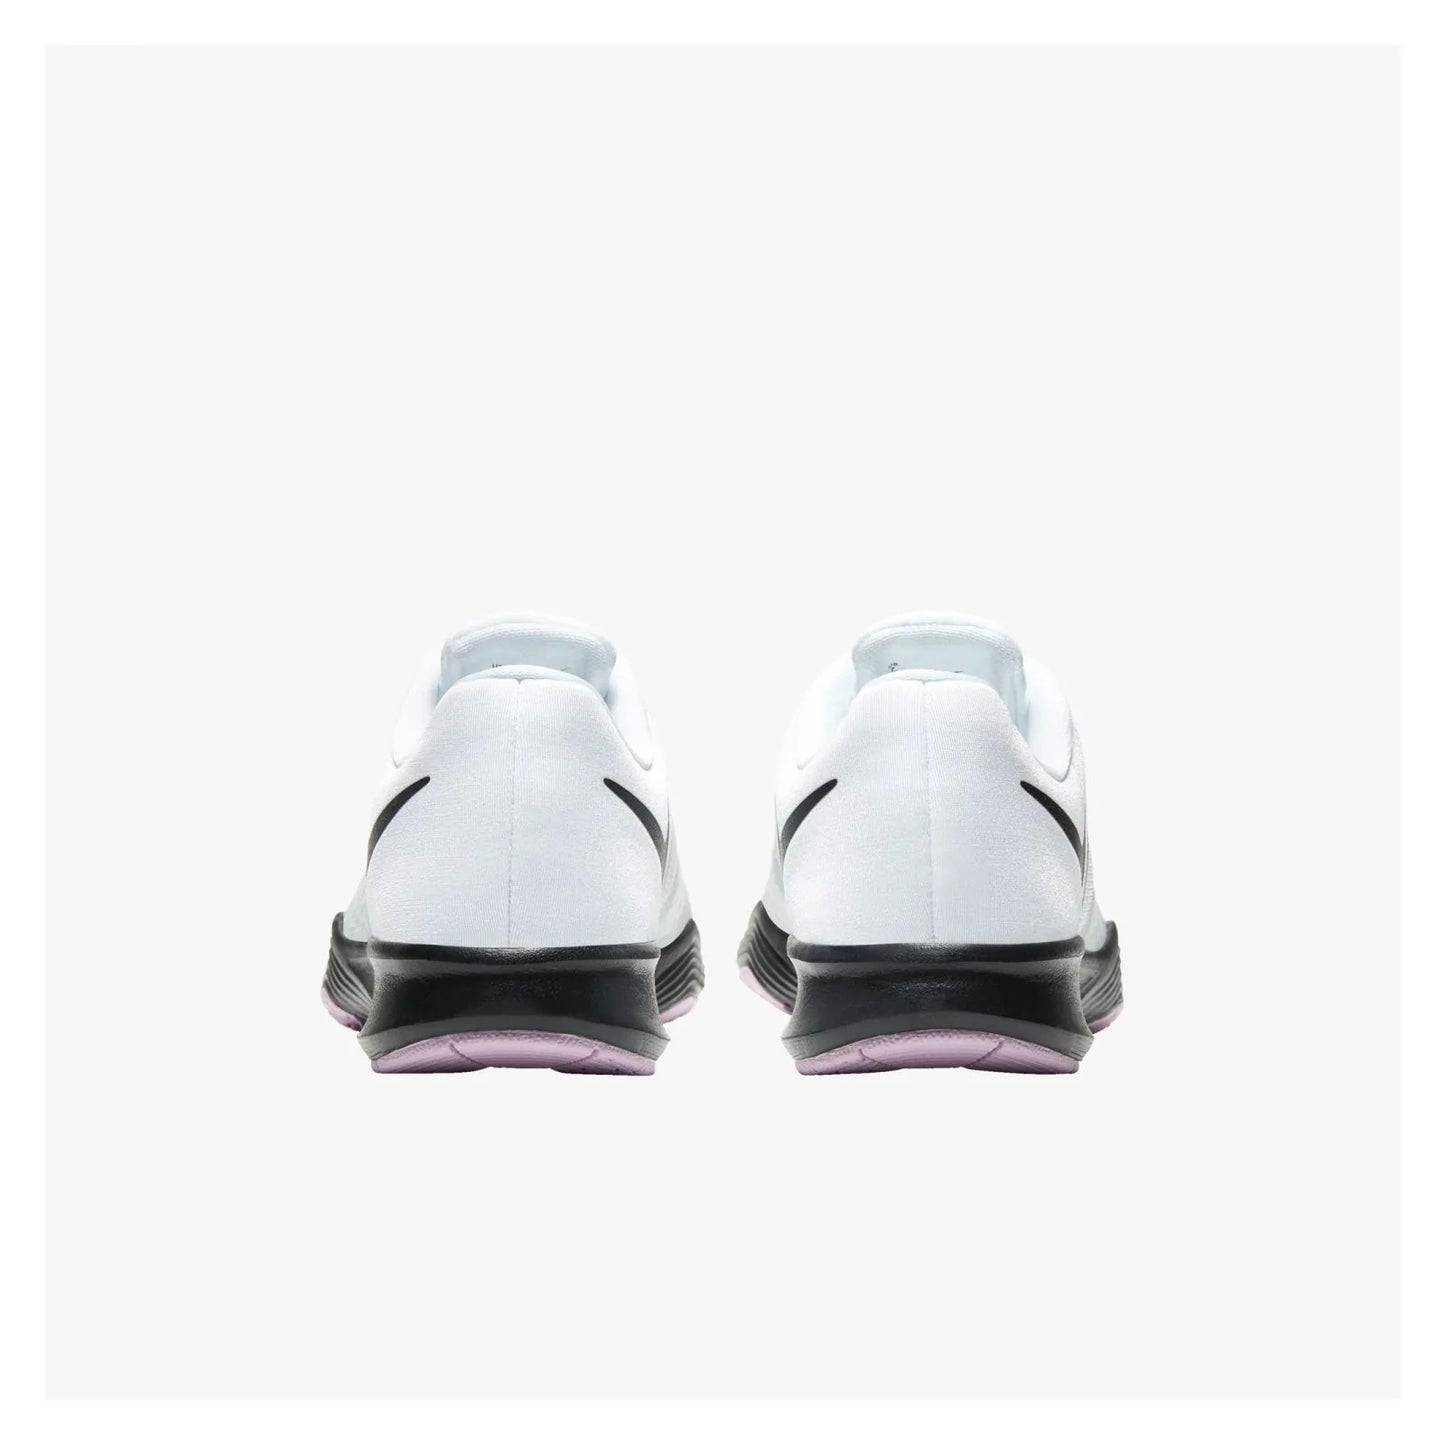 Nike WMNS City Trainer 2 Mujer